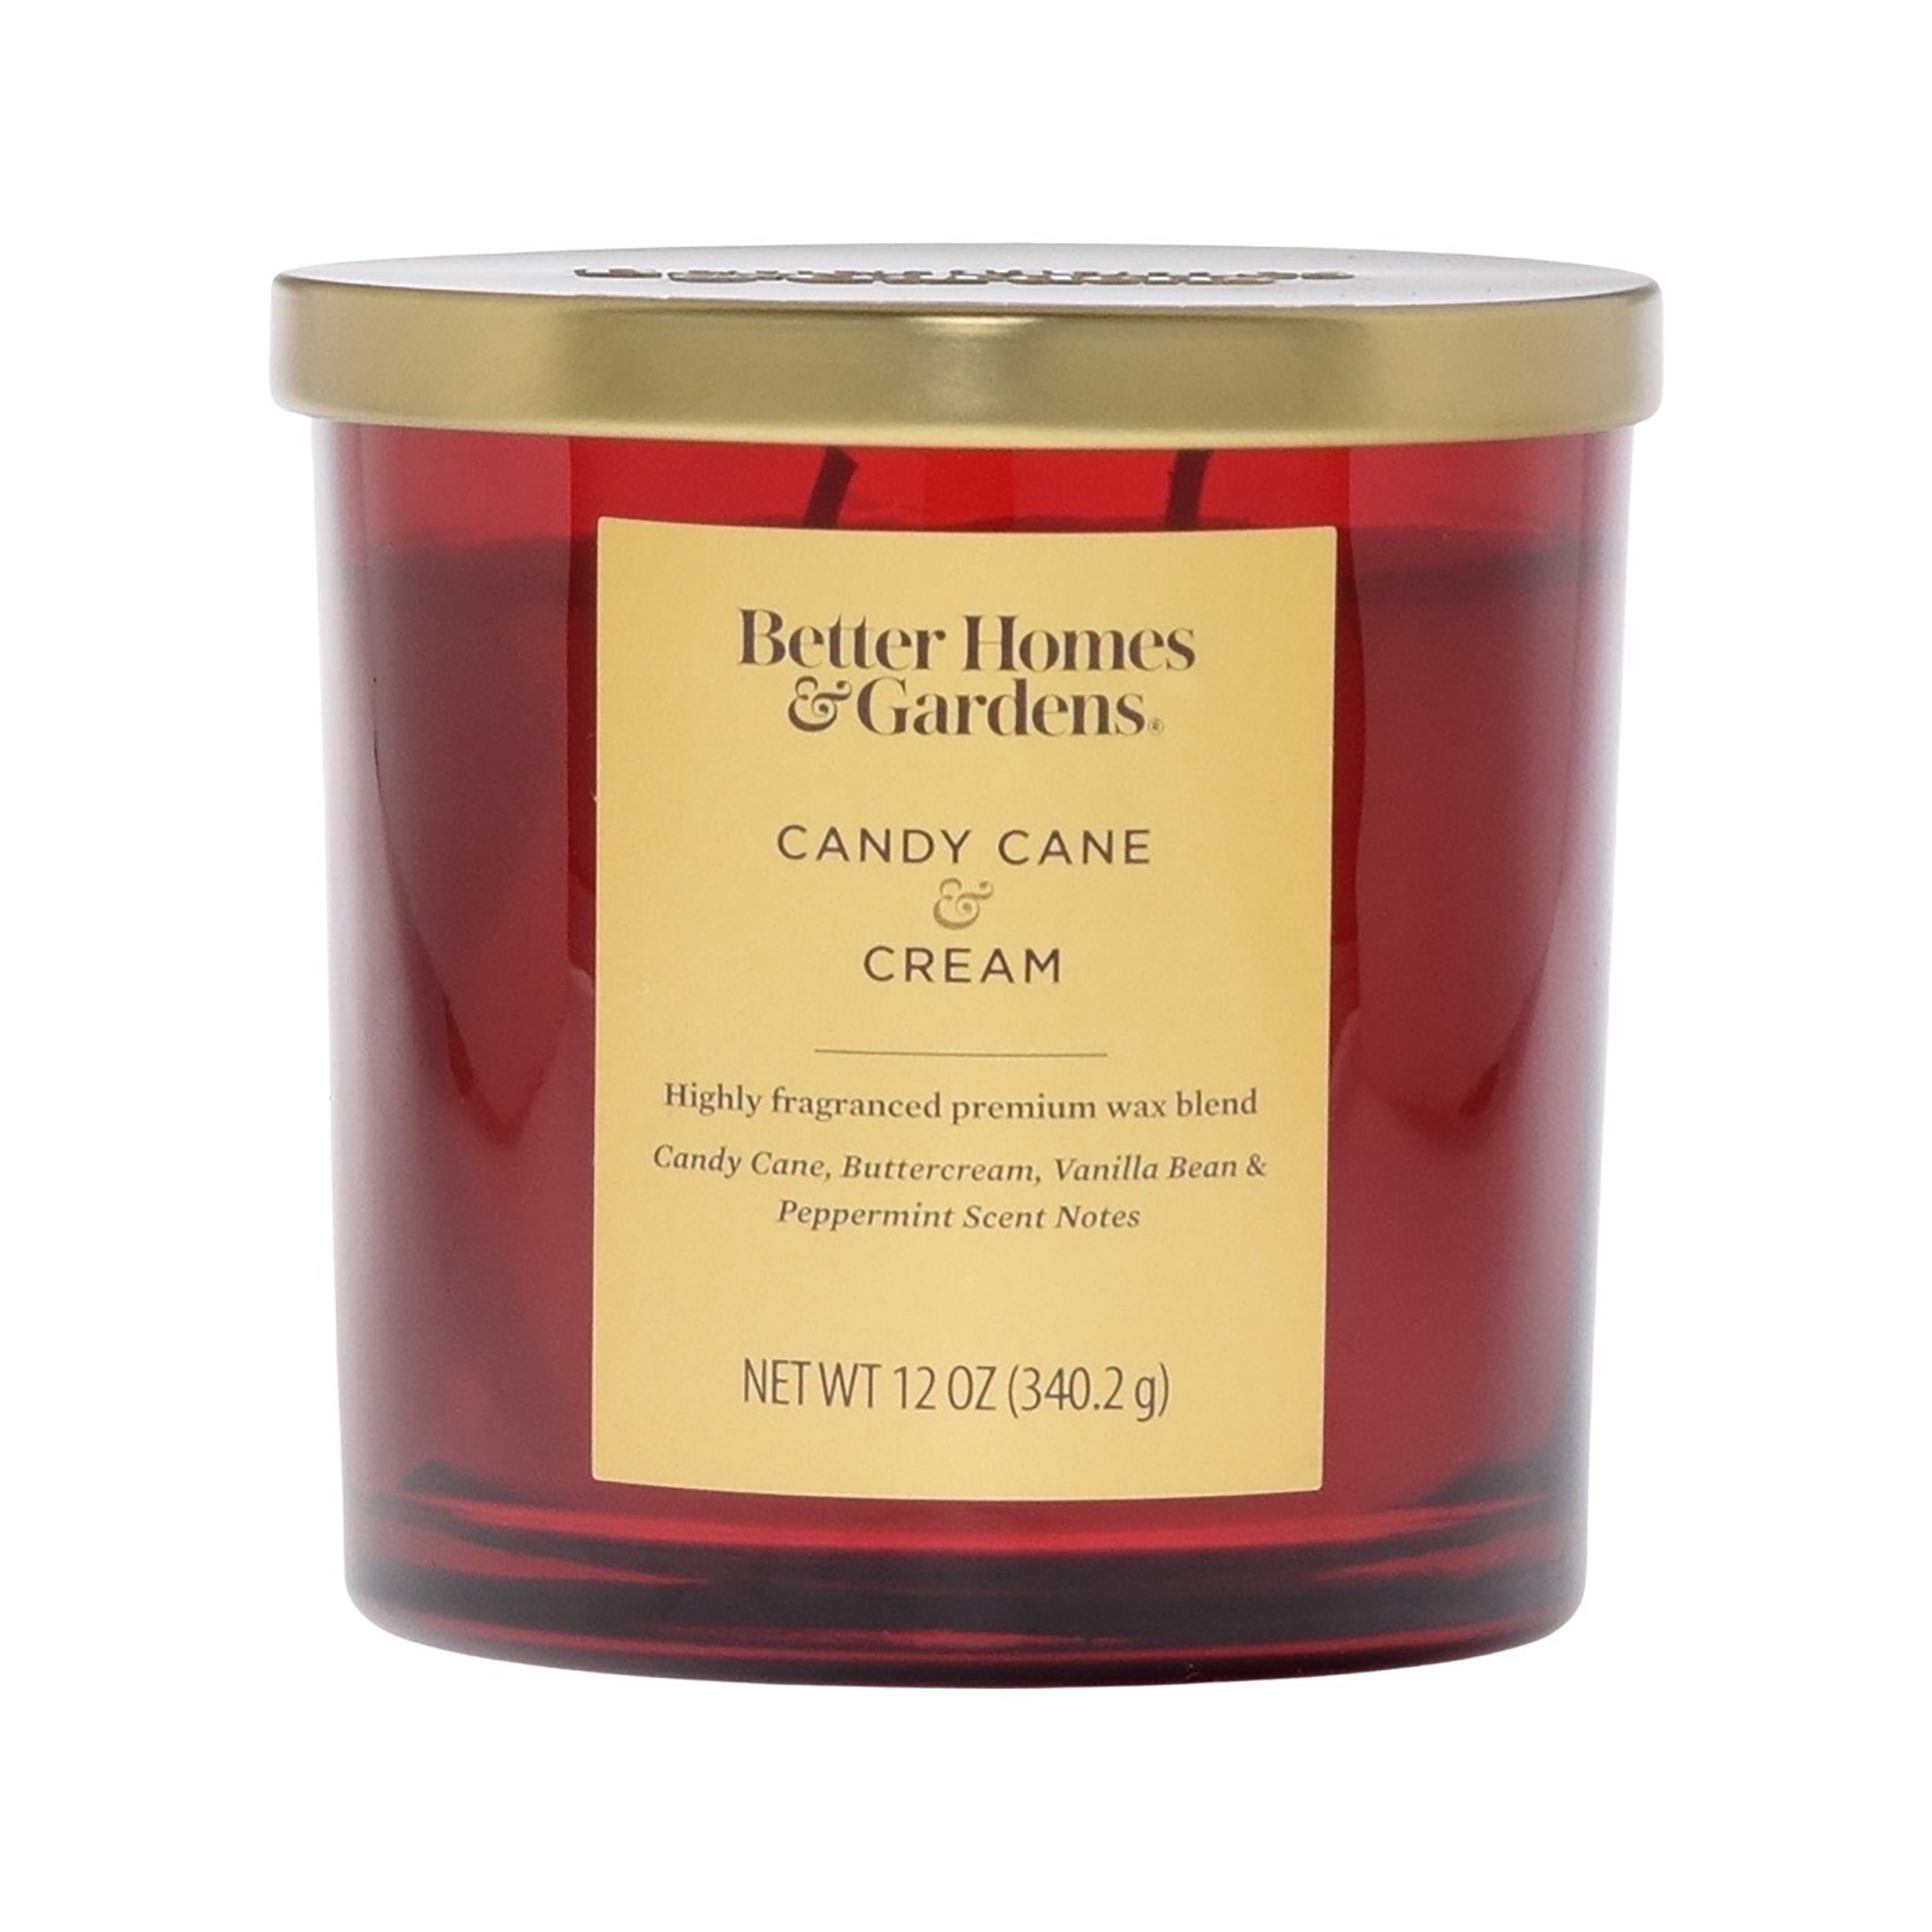 Better Homes & Gardens 12oz Candy Cane & Cream Scented 2-Wick Shiny Jar candle